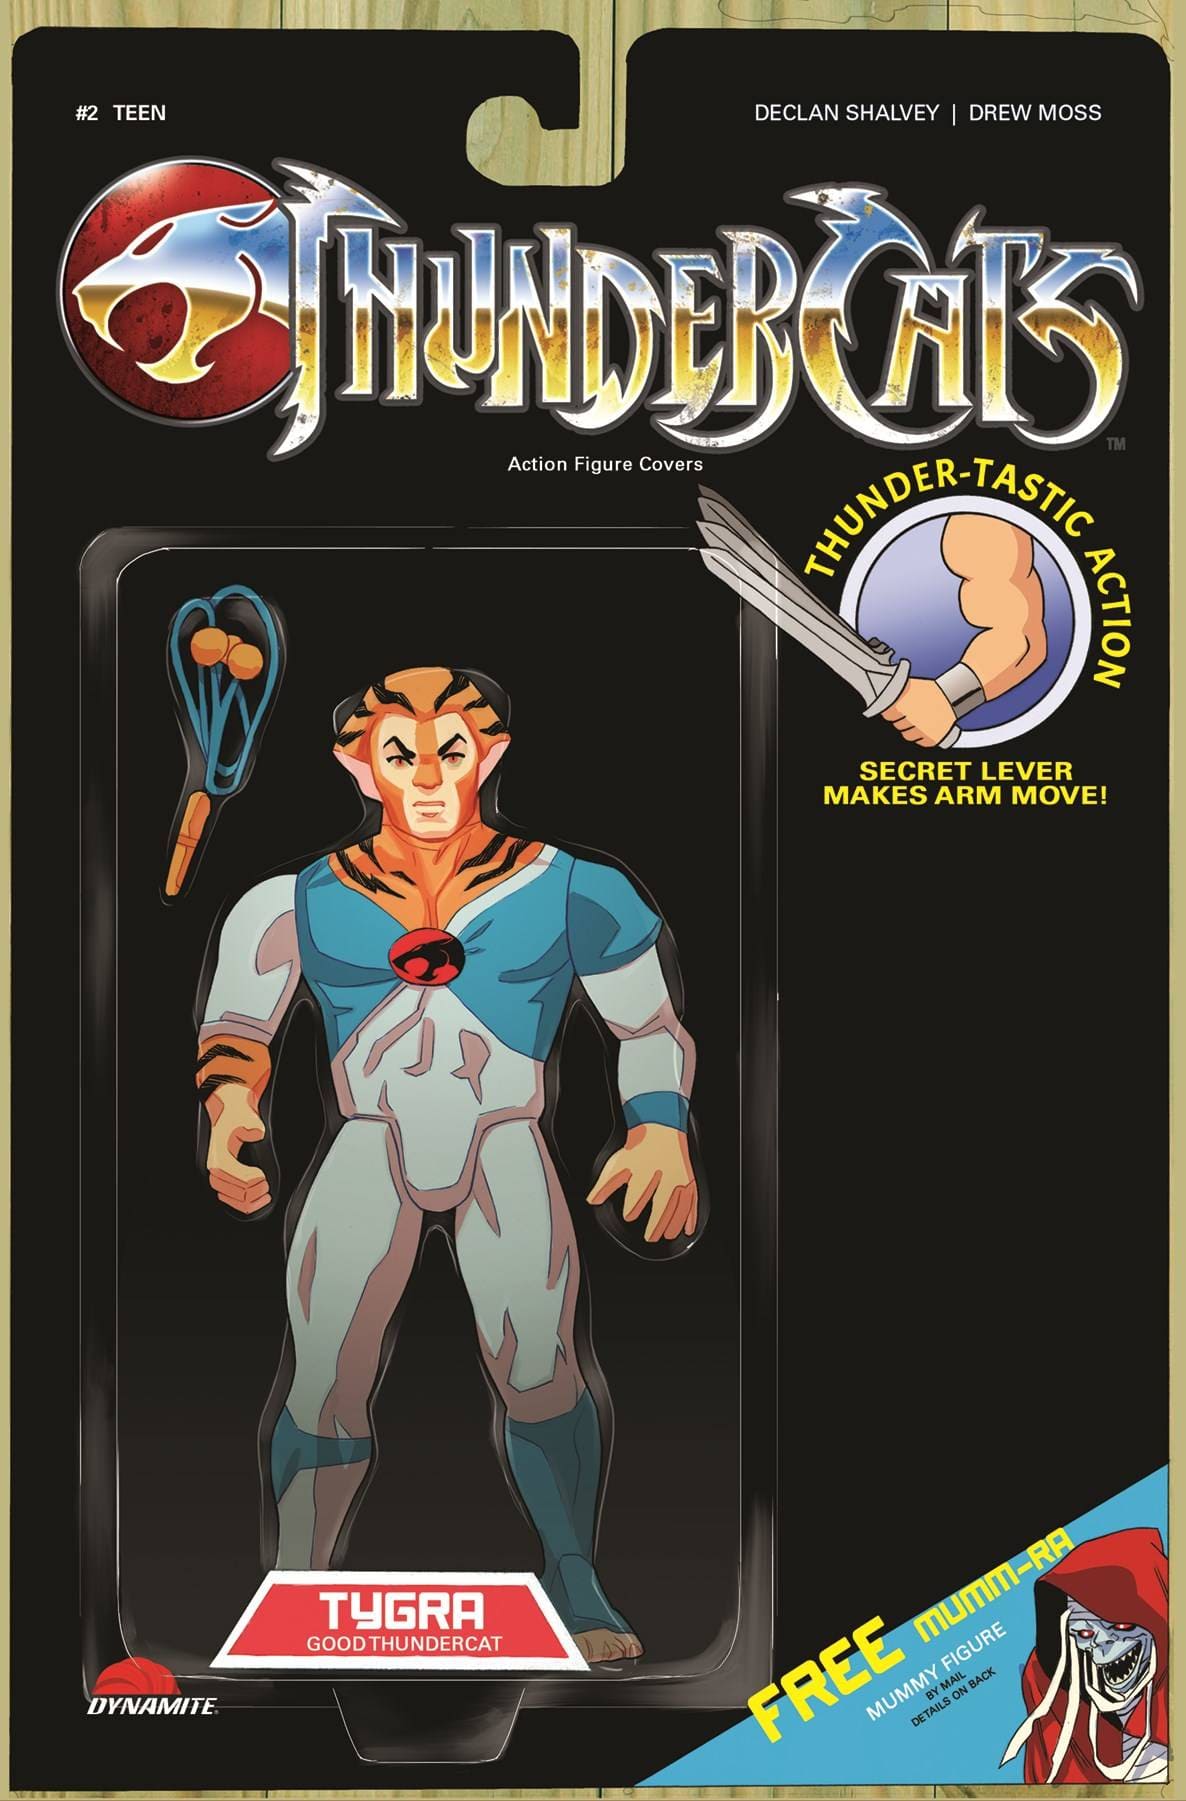 THUNDERCATS #2 CVR F ACTION FIGURE [SIGNED BY DECLAN SHALVEY]